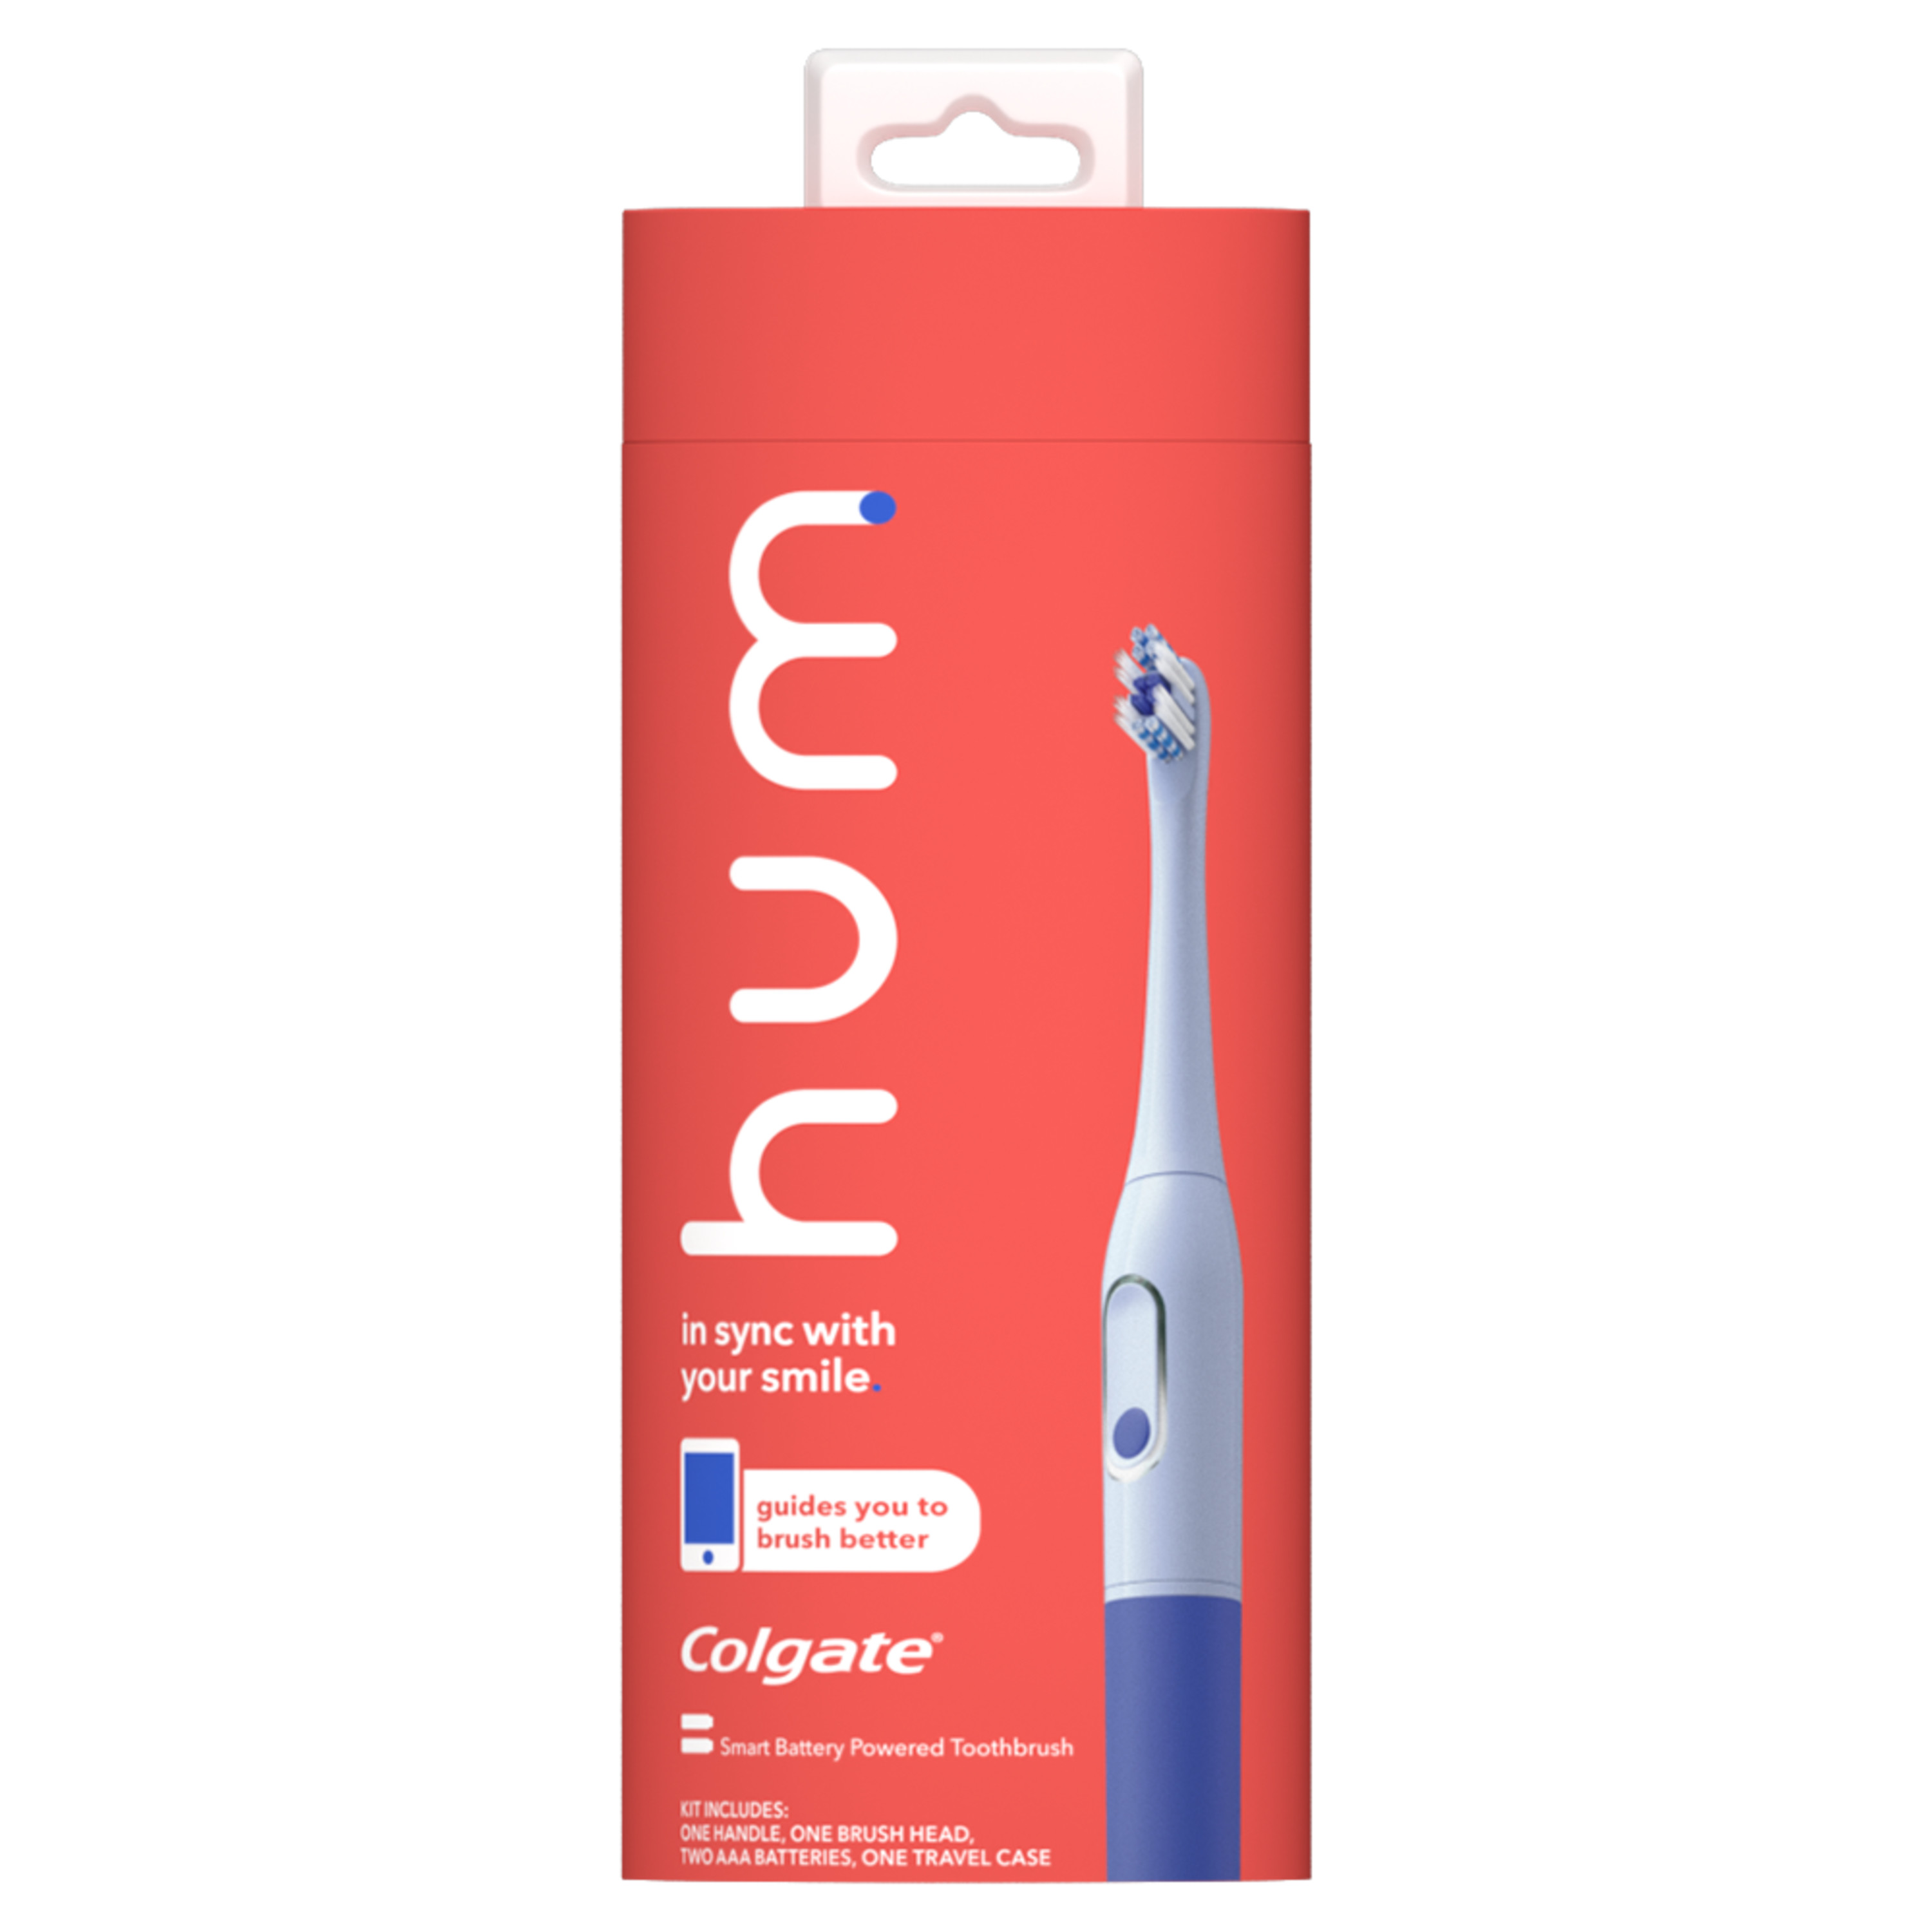 hum by Colgate Smart Battery Toothbrush Kit, Sonic Toothbrush with Travel Case, Blue - image 1 of 5